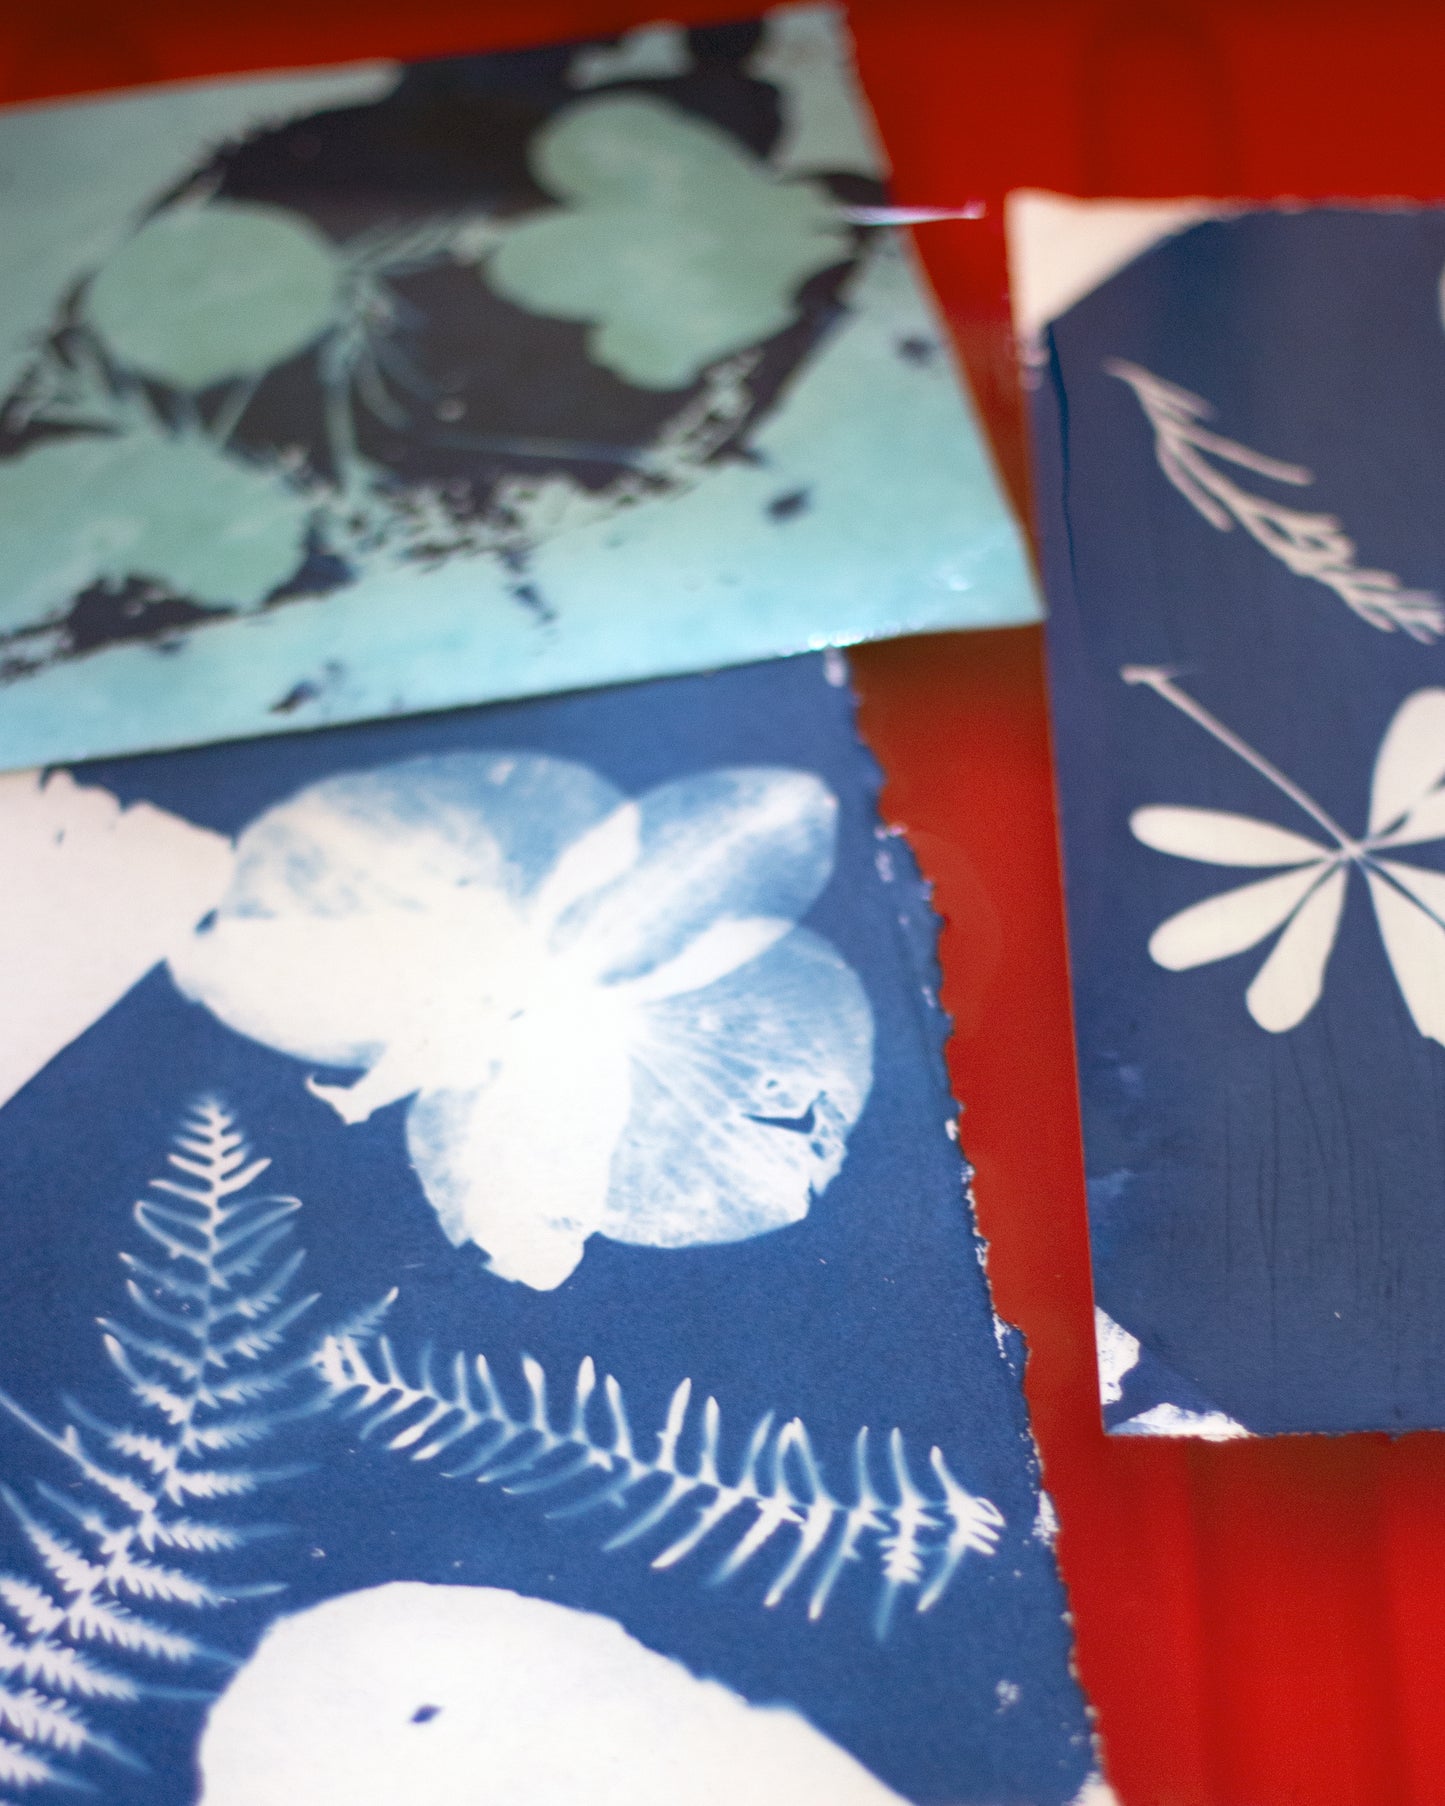 Cyanotype Workshop "Cyanotype on Paper and Fabric" with Inês in Porto, Portugal